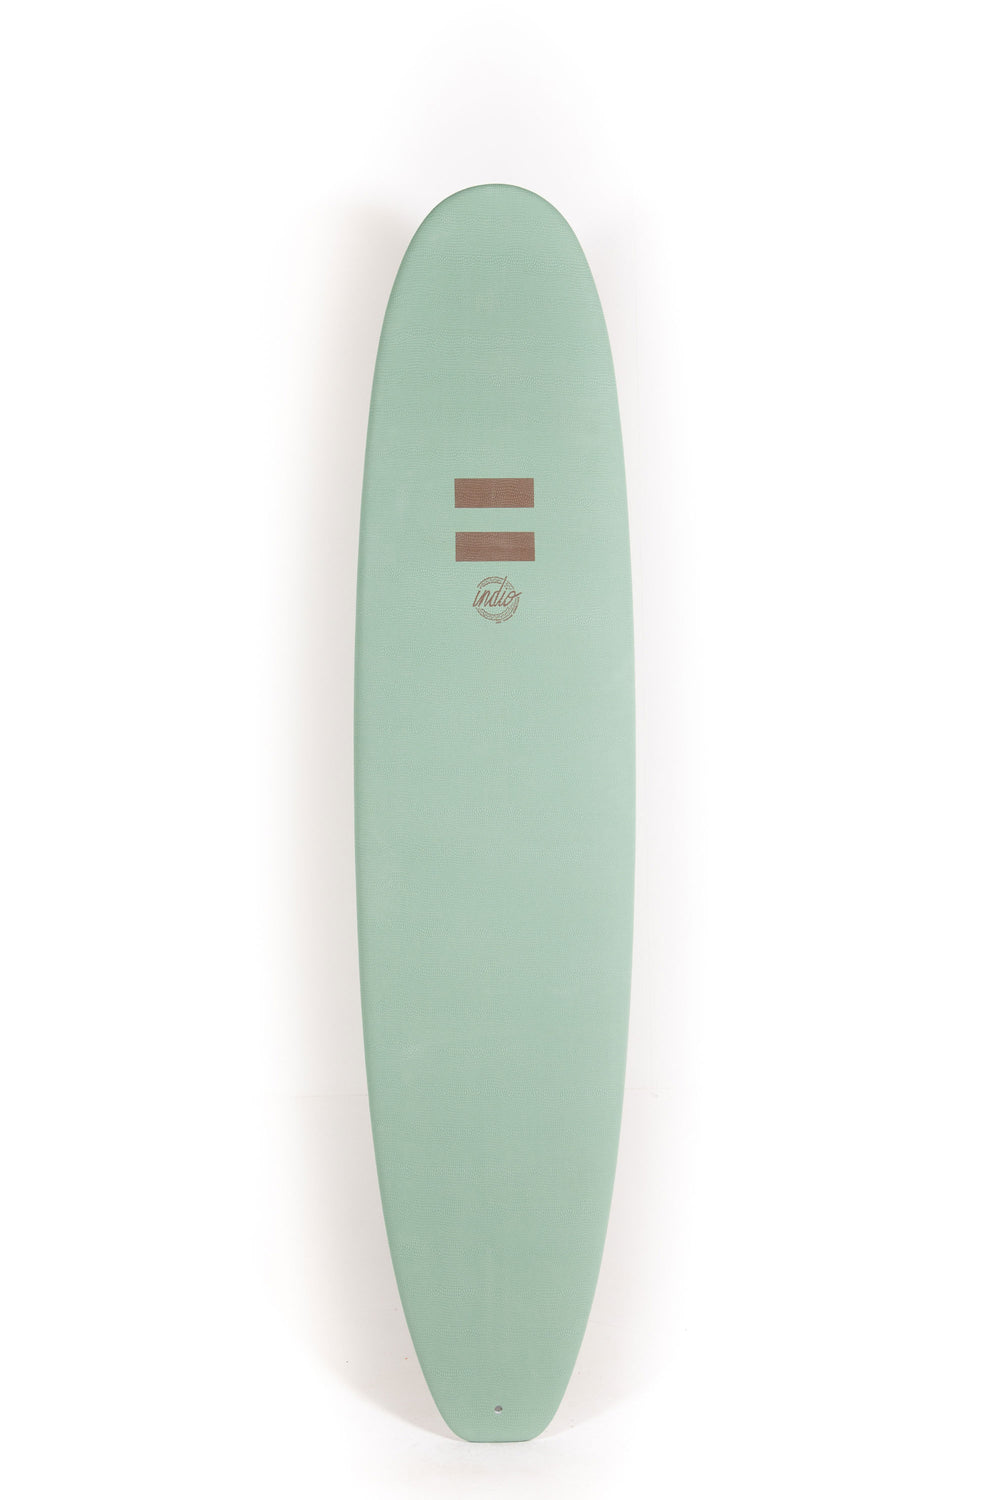 Pukas Surf Shop Indio Surfboards Mid Length Ultra Mint 8'0